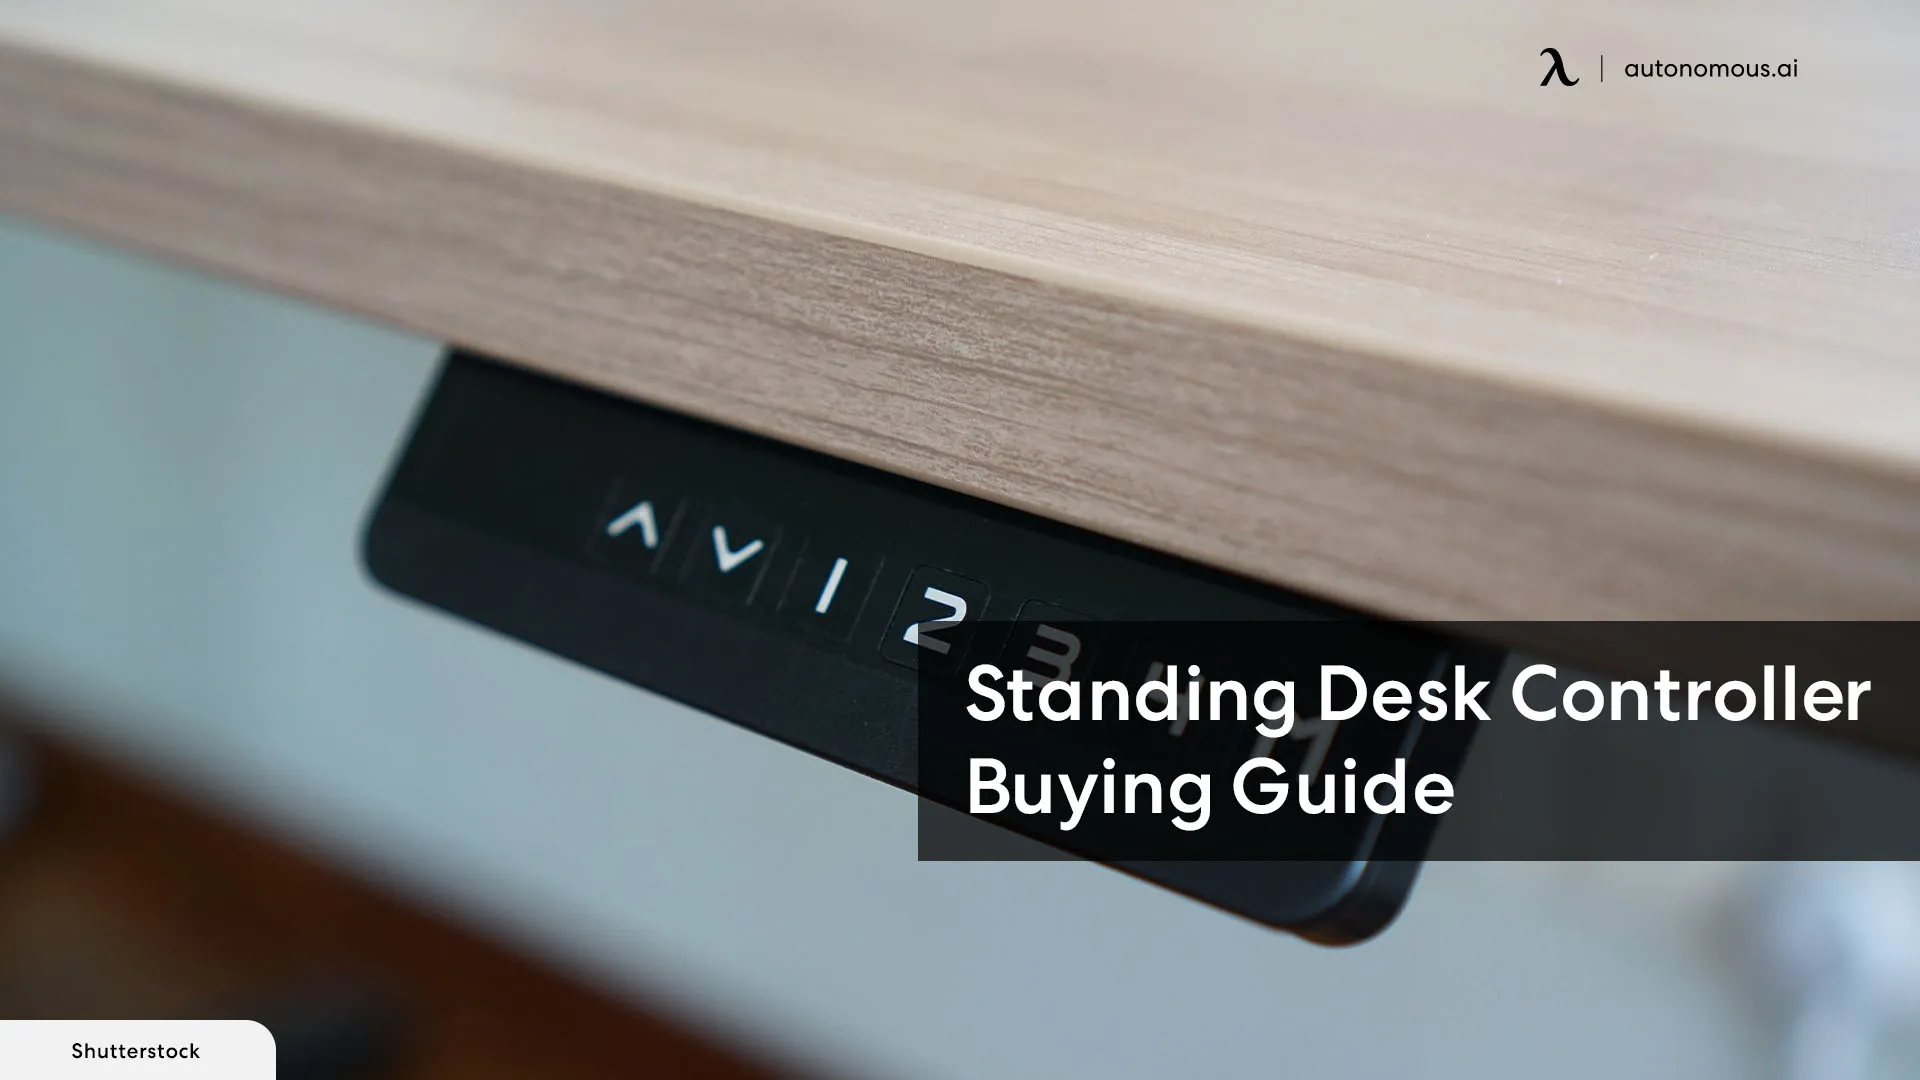 What to Consider When Buying a Standing Desk Controller?